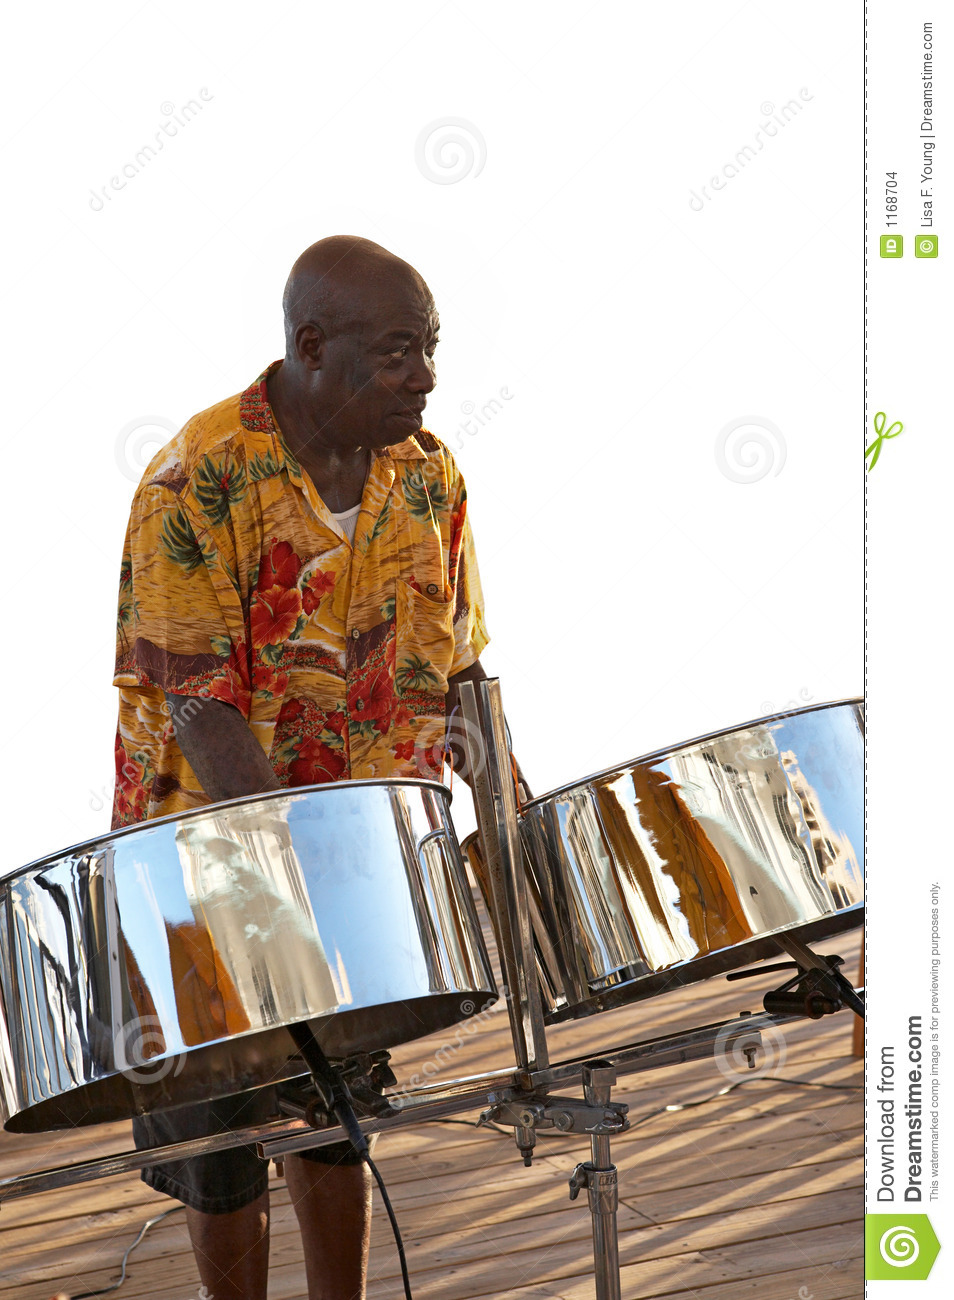 Caribbean Musician   Steel Drums Stock Images   Image  1168704